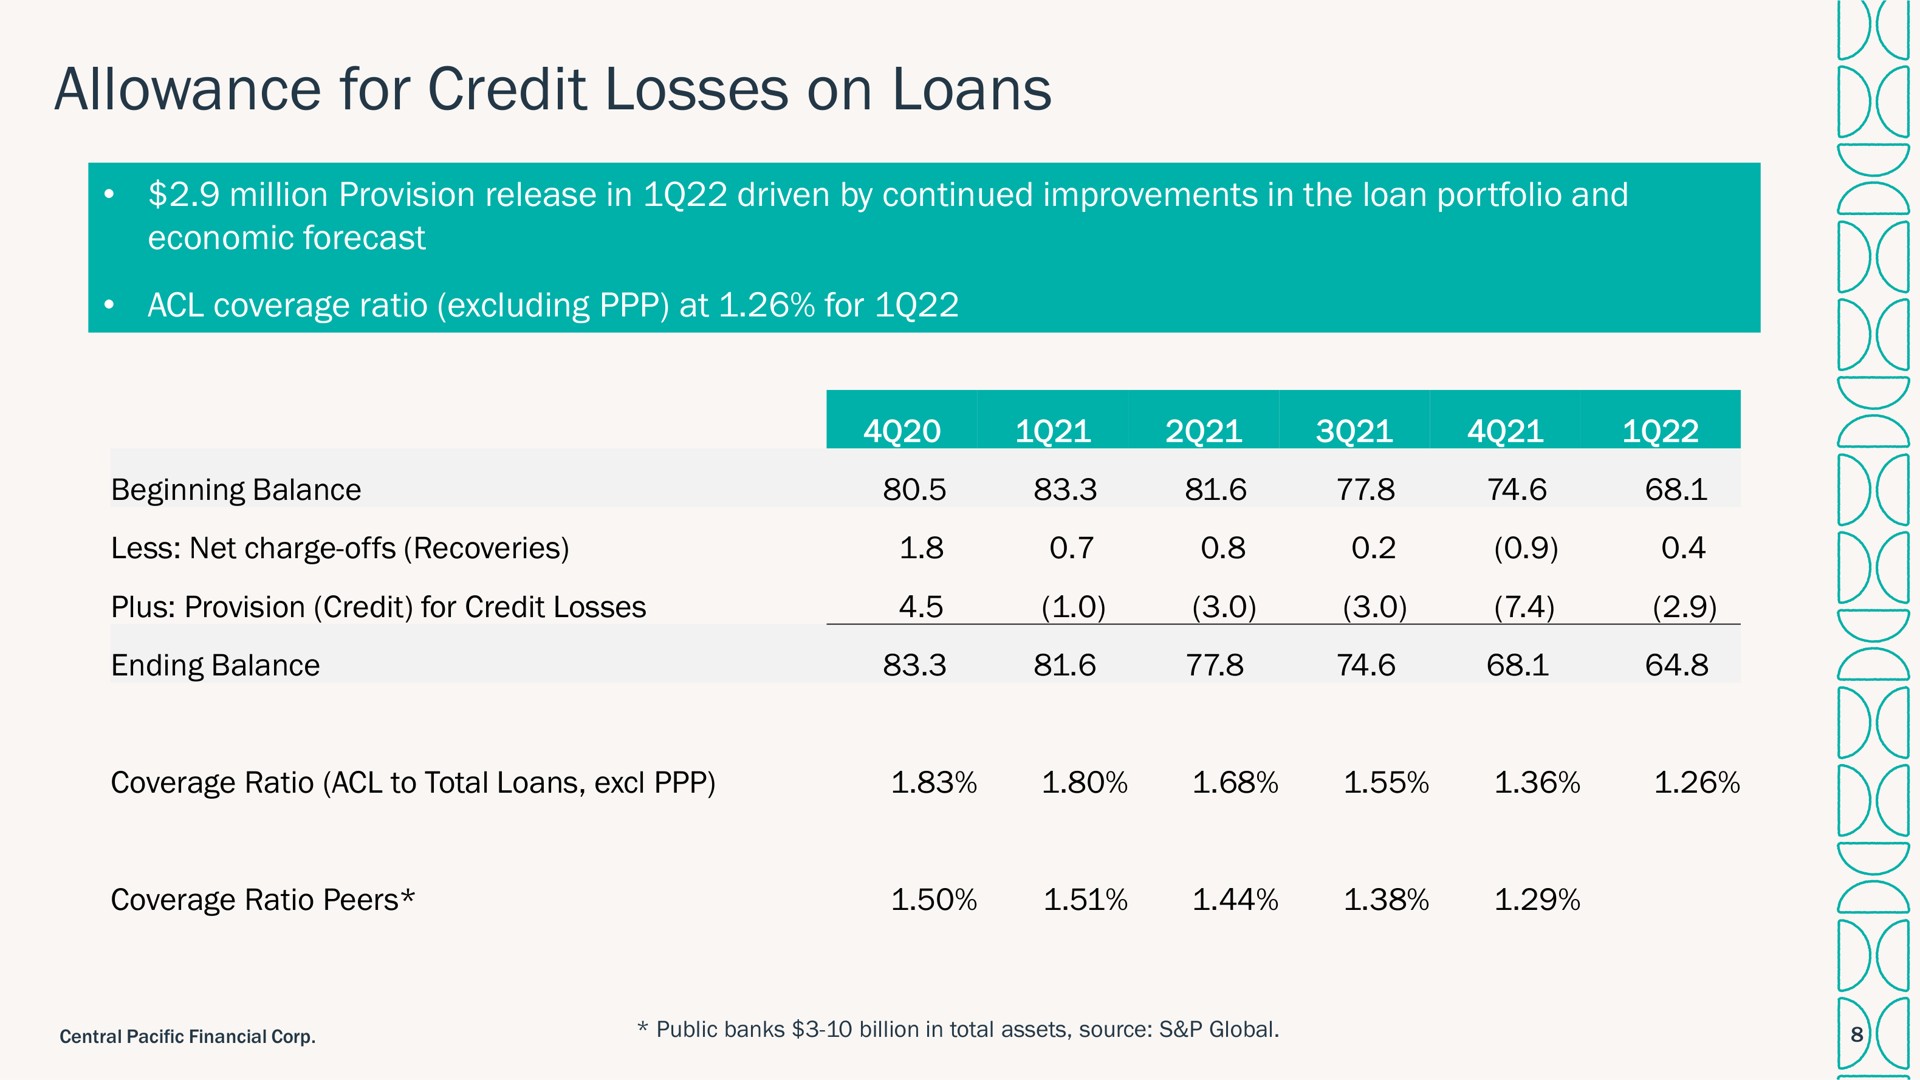 allowance for credit losses on loans a i | Central Pacific Financial